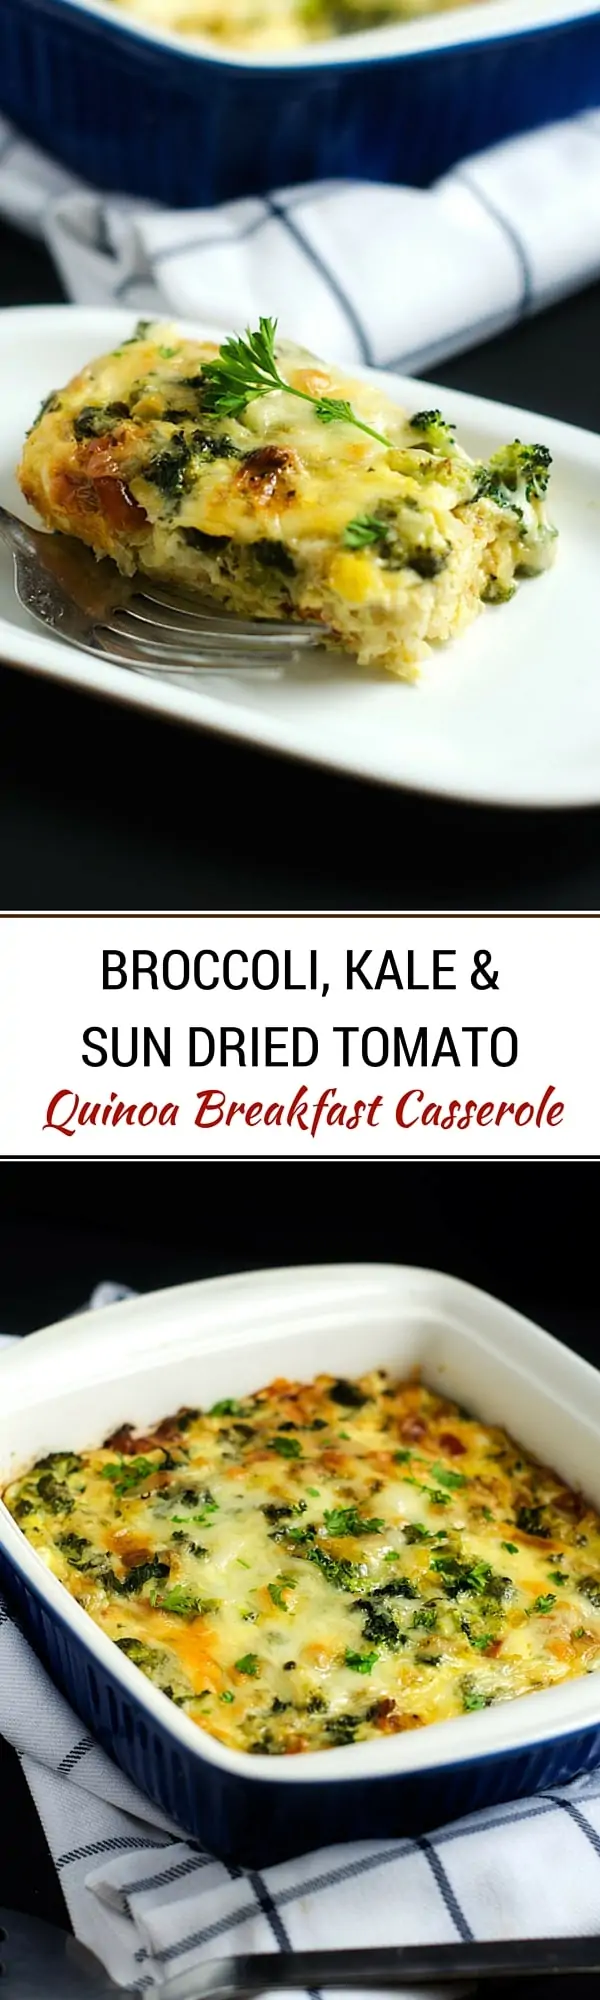 Broccoli, Kale & Sun Dried Tomato Quinoa Breakfast Casserole - This vegetarian breakfast casserole is the perfect healthy way to start your day! - WendyPolisi.com #thereciperedux 